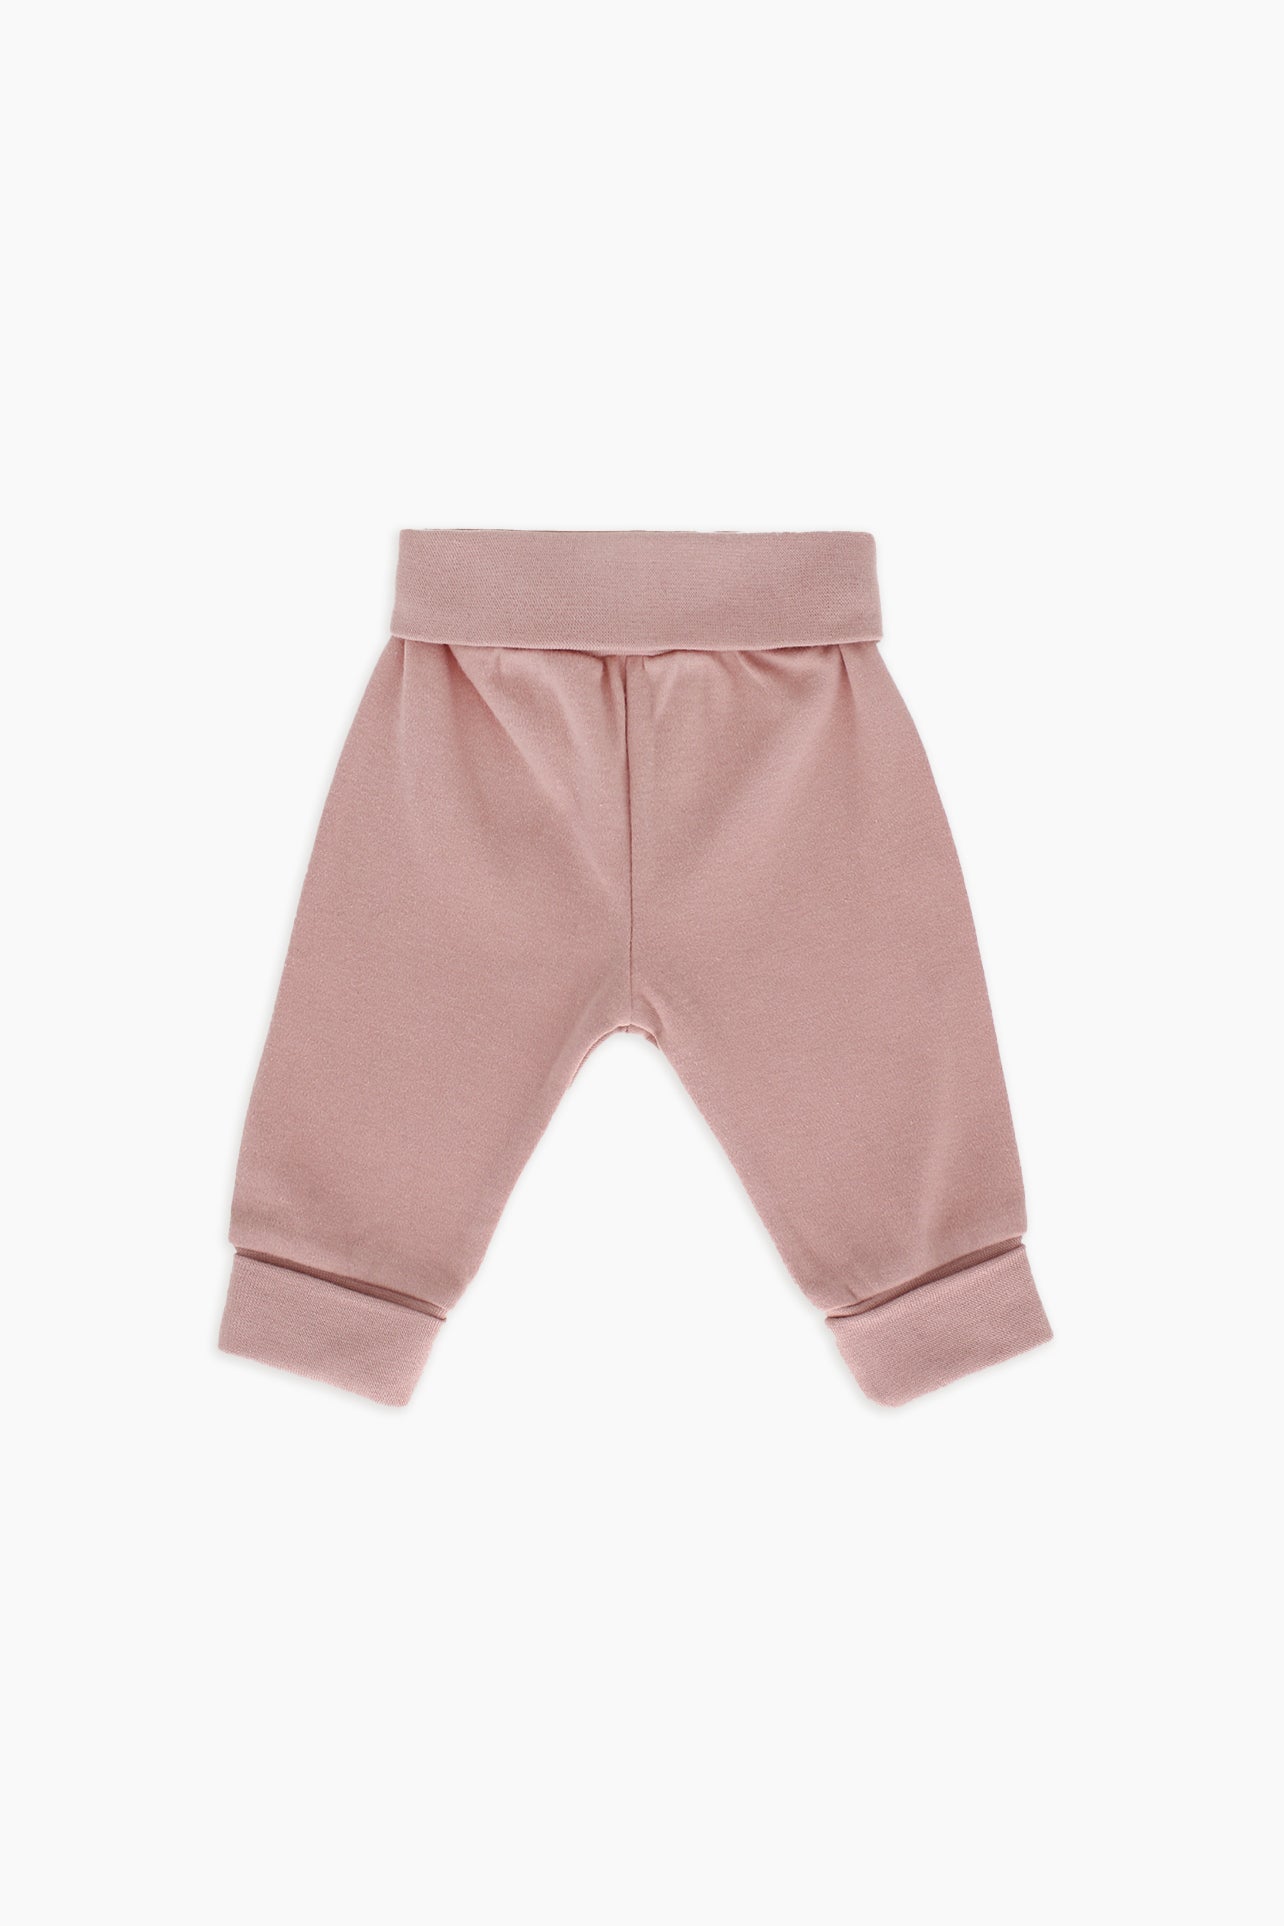 Organic Cotton Grow-with-Me Baby Pants - Misty Rose